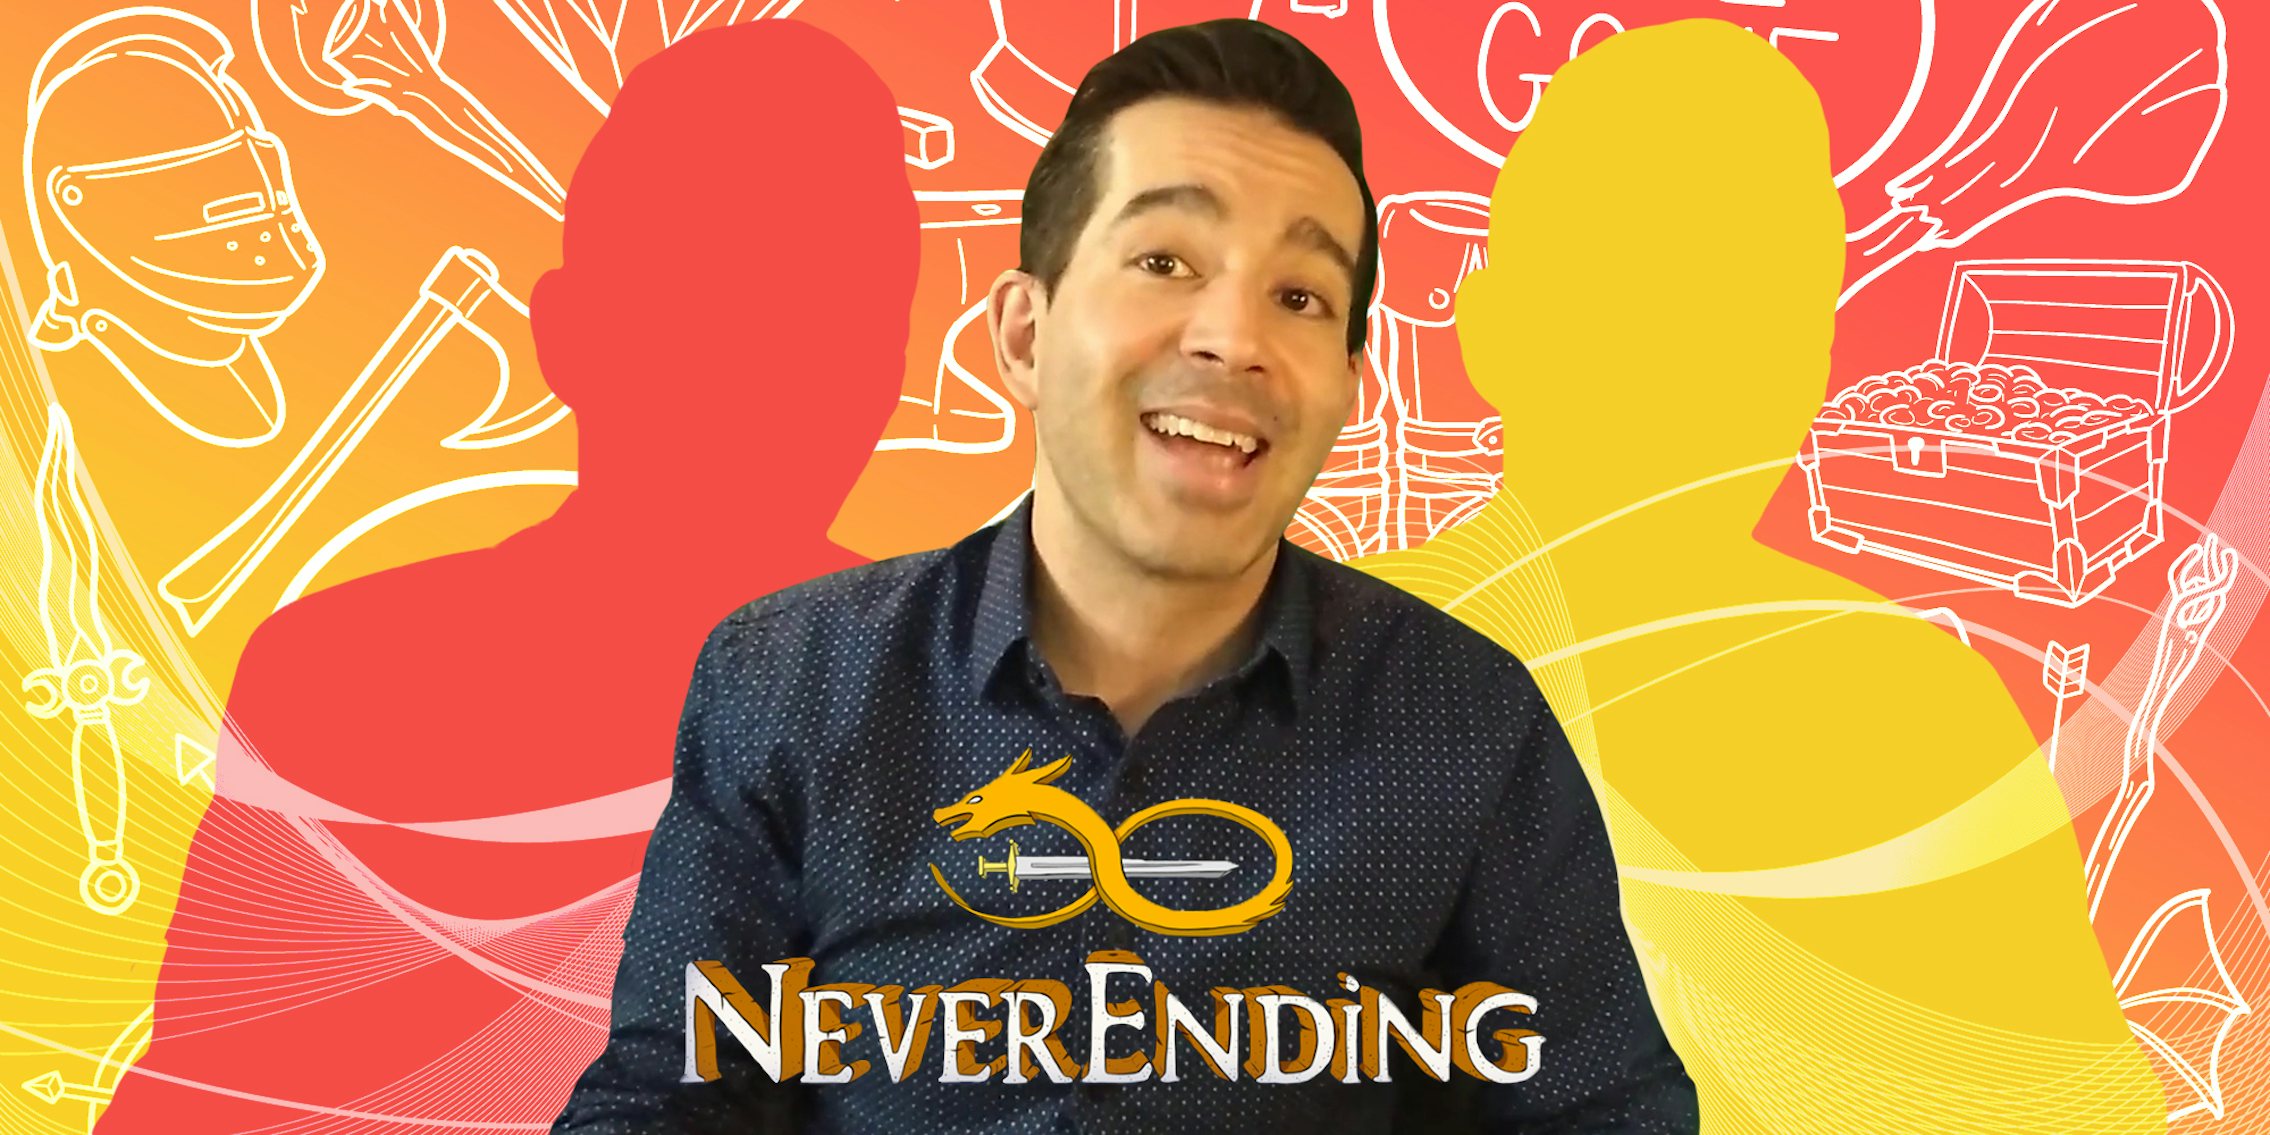 Never Ending creator with logo in front of pink to yellow gradient background with role play fantasy game doodle background Passionfruit Remix